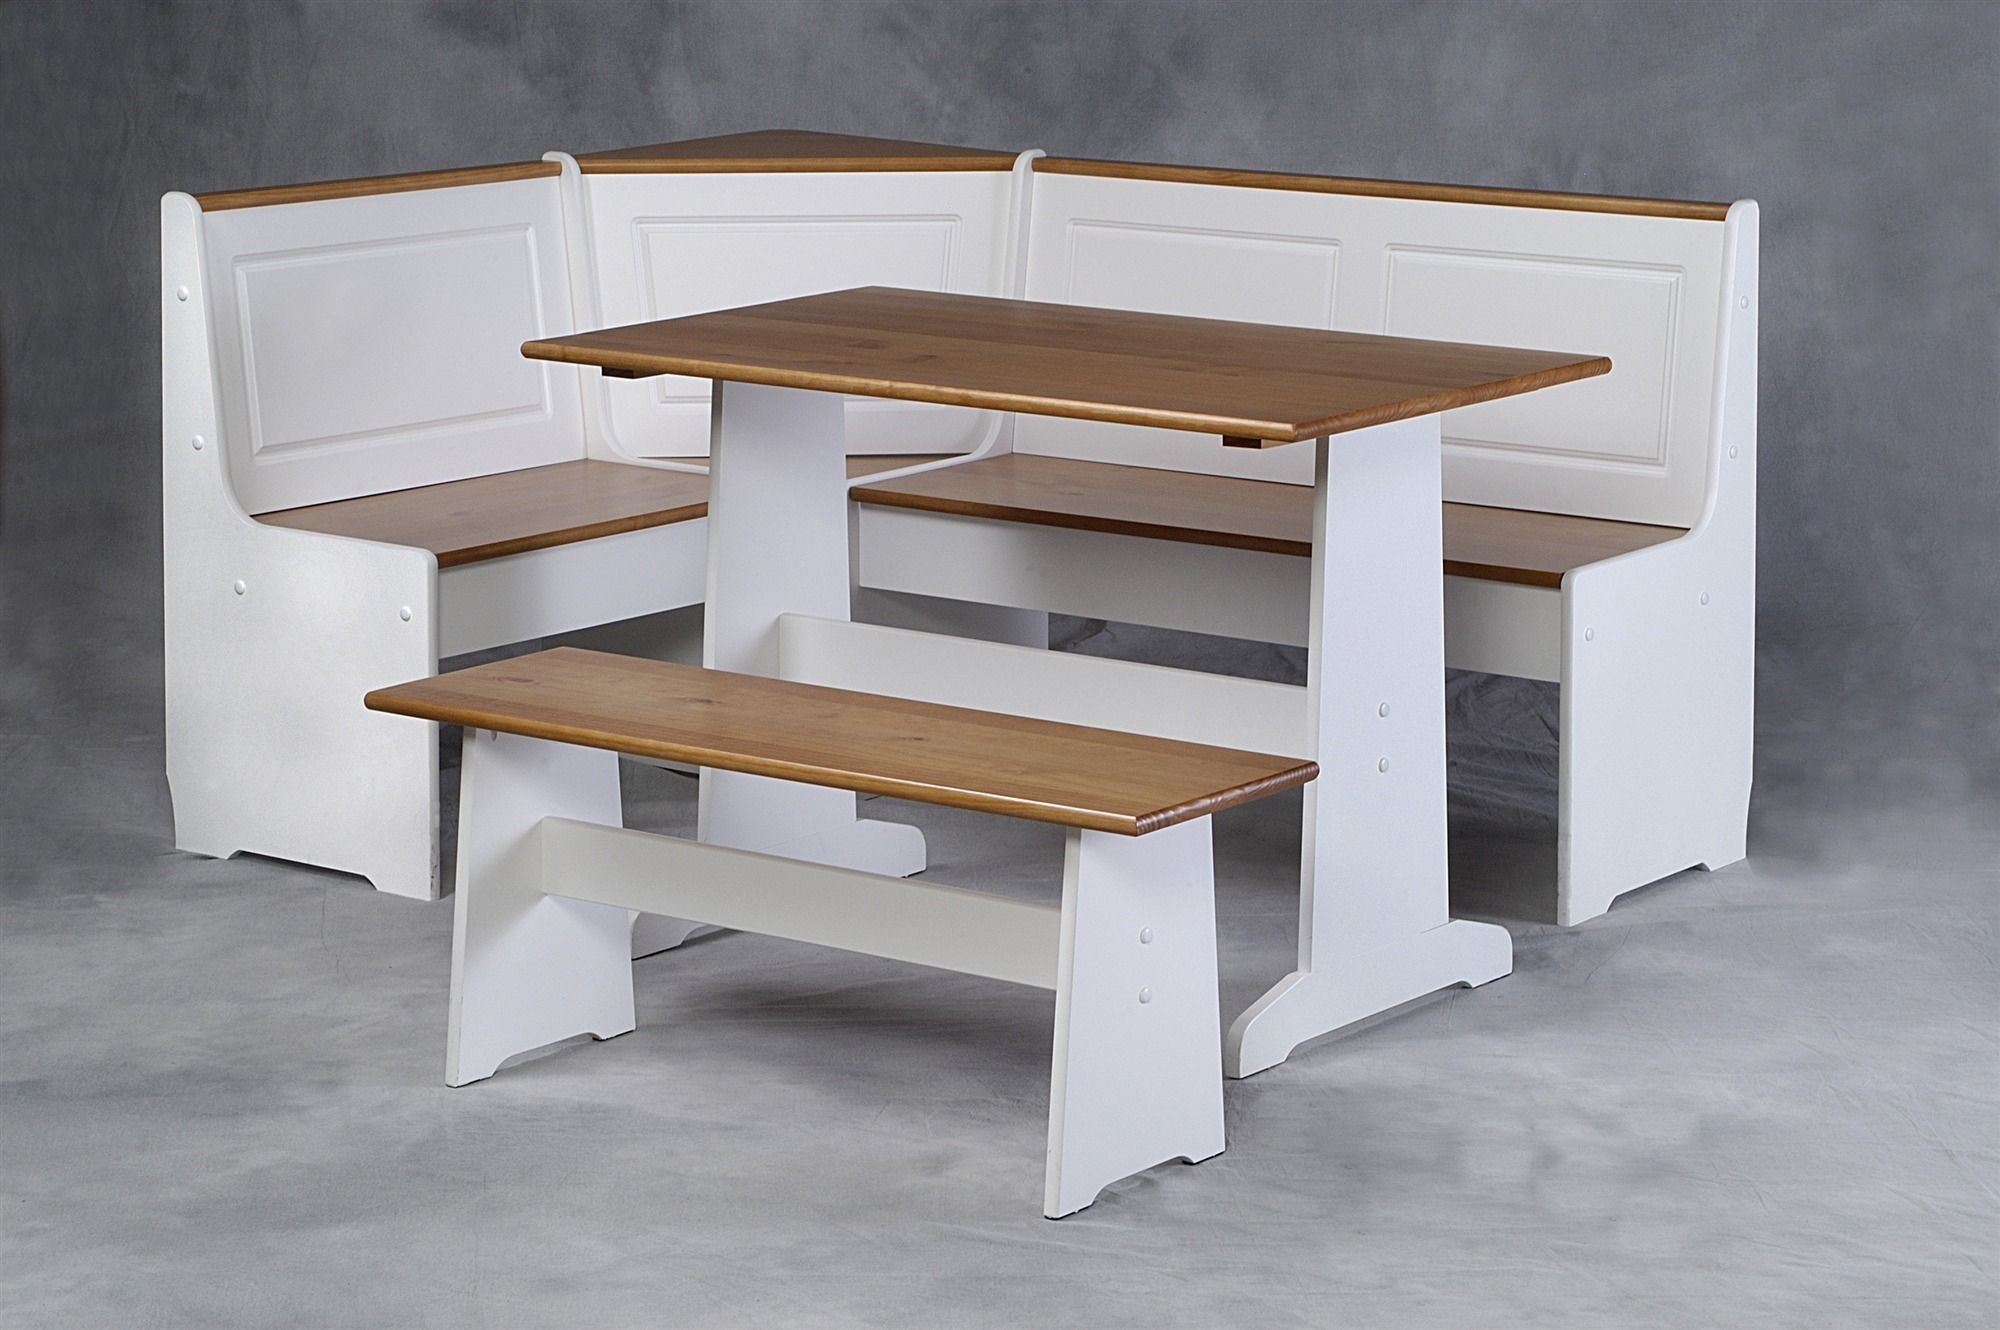 Small kitchen tables with bench 1